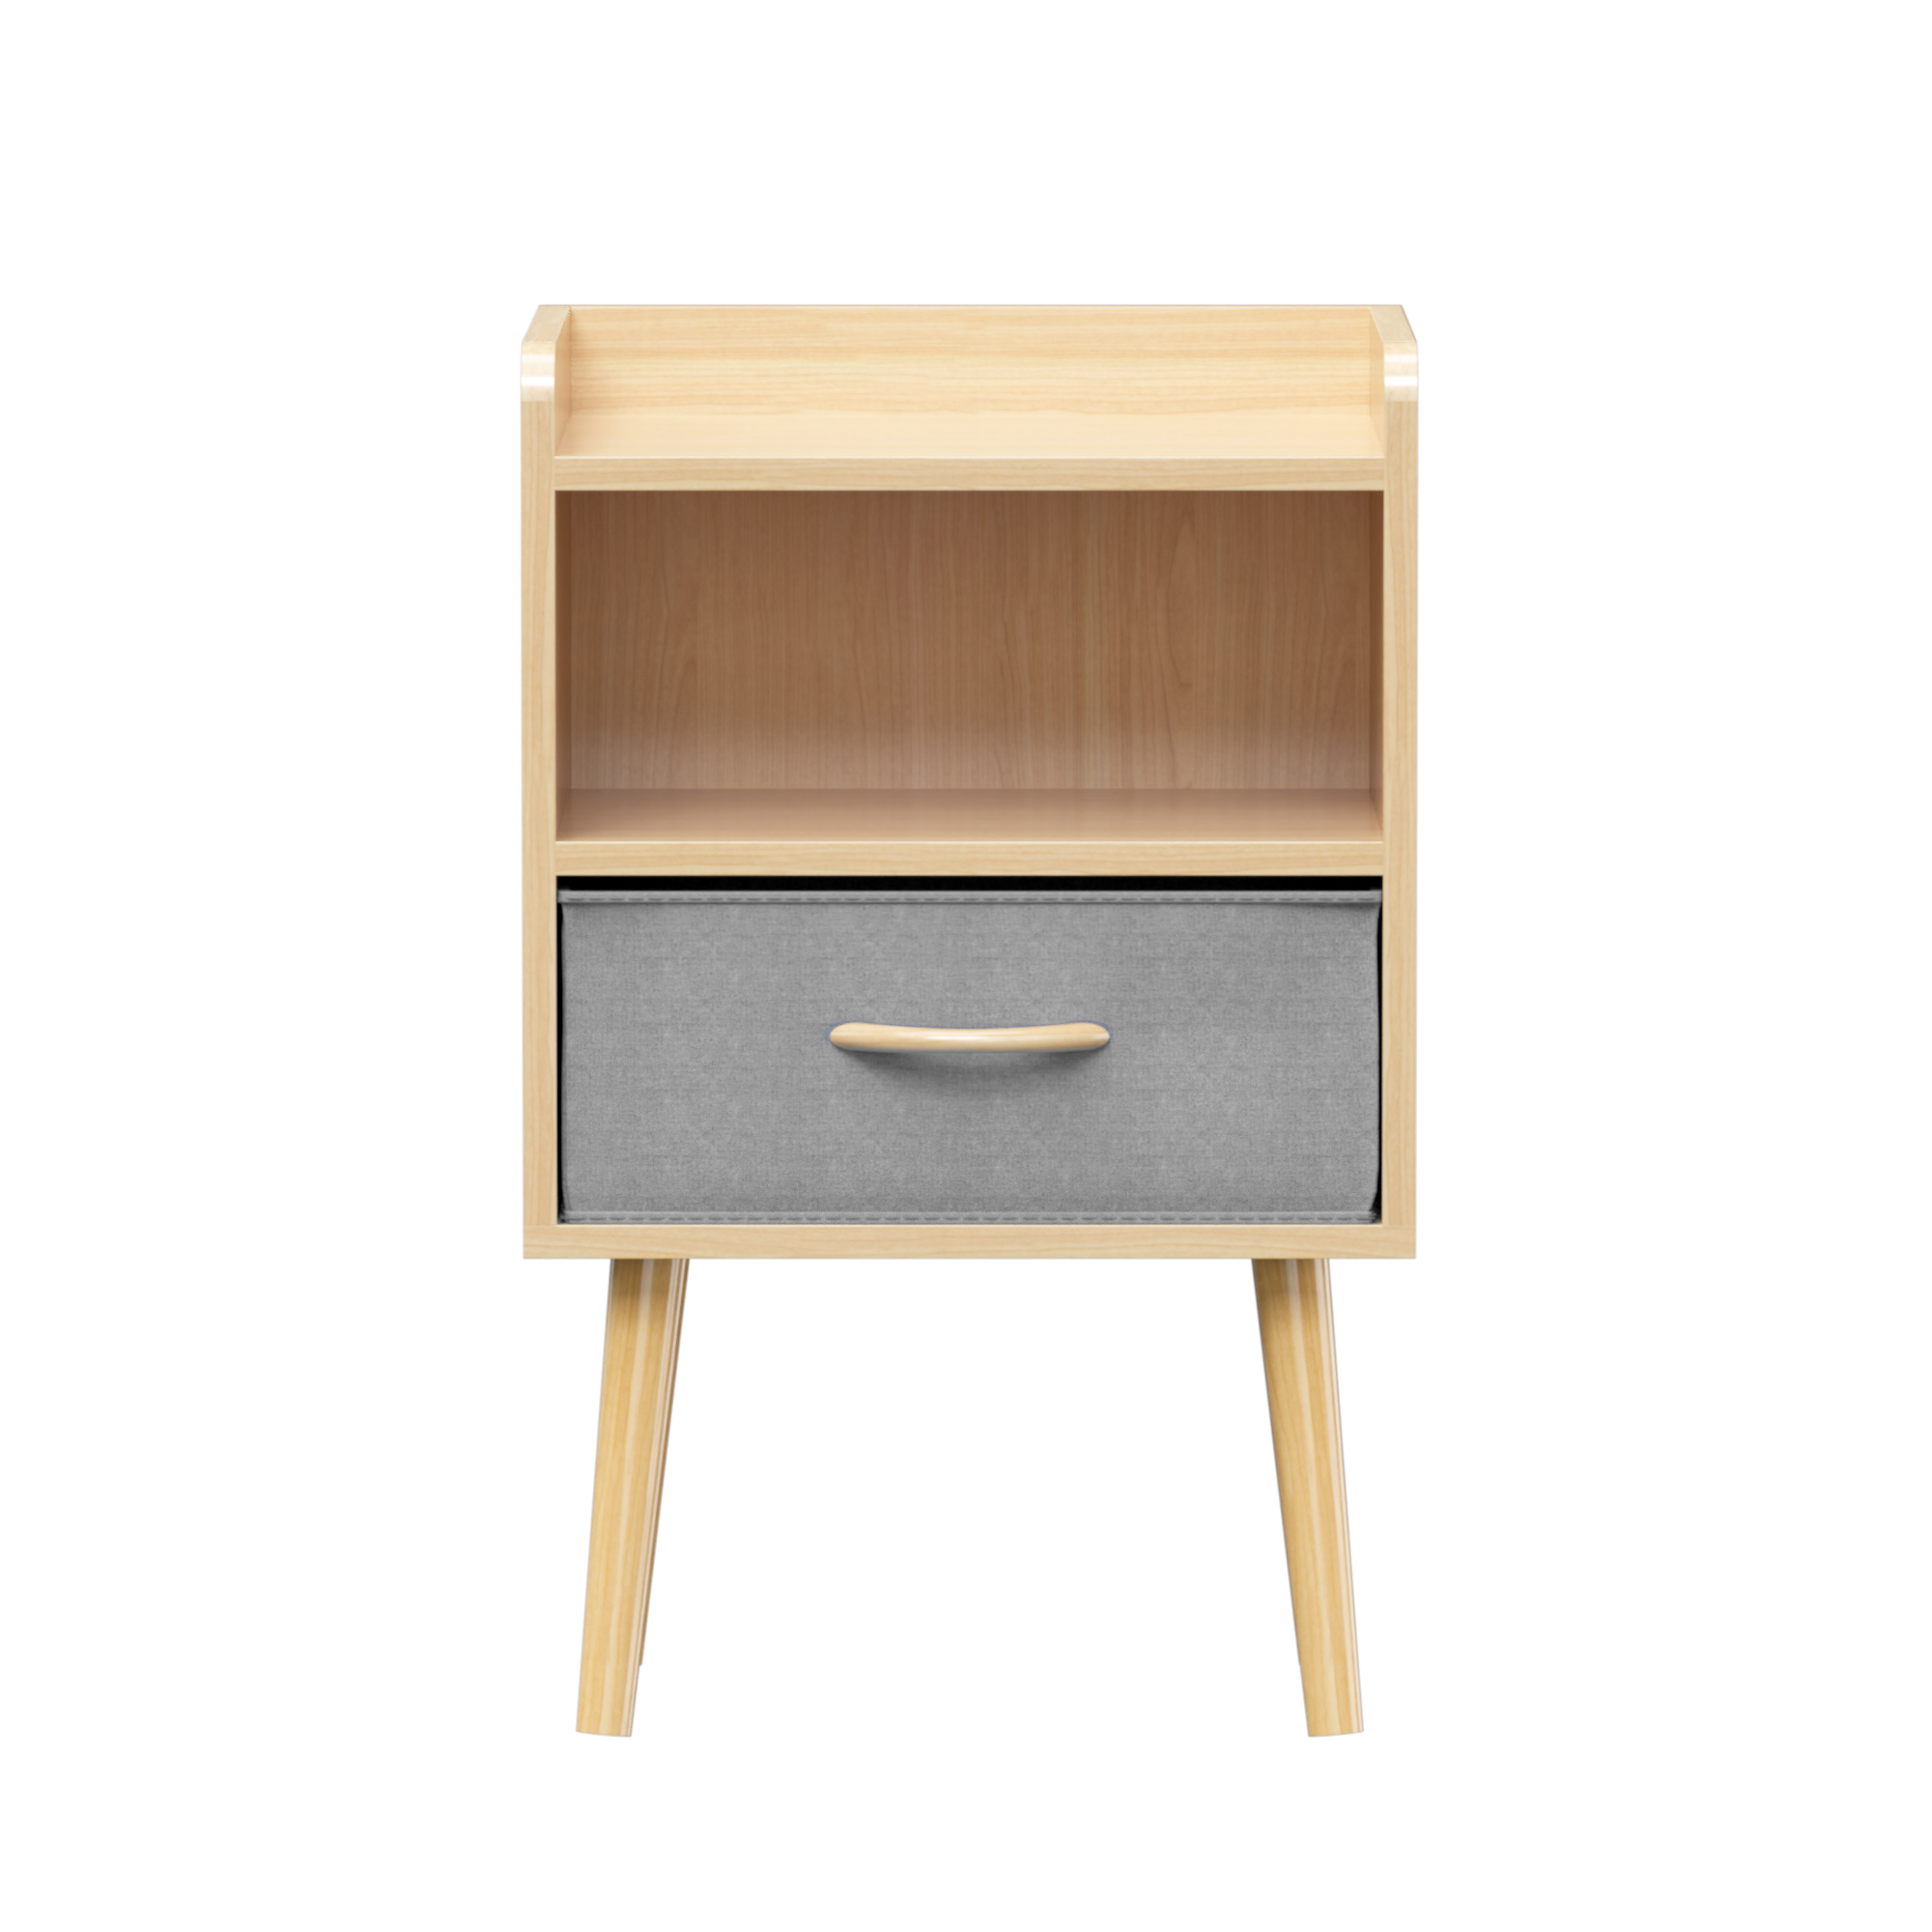 Wood Nightstand With Collapsible Fabric Drawer